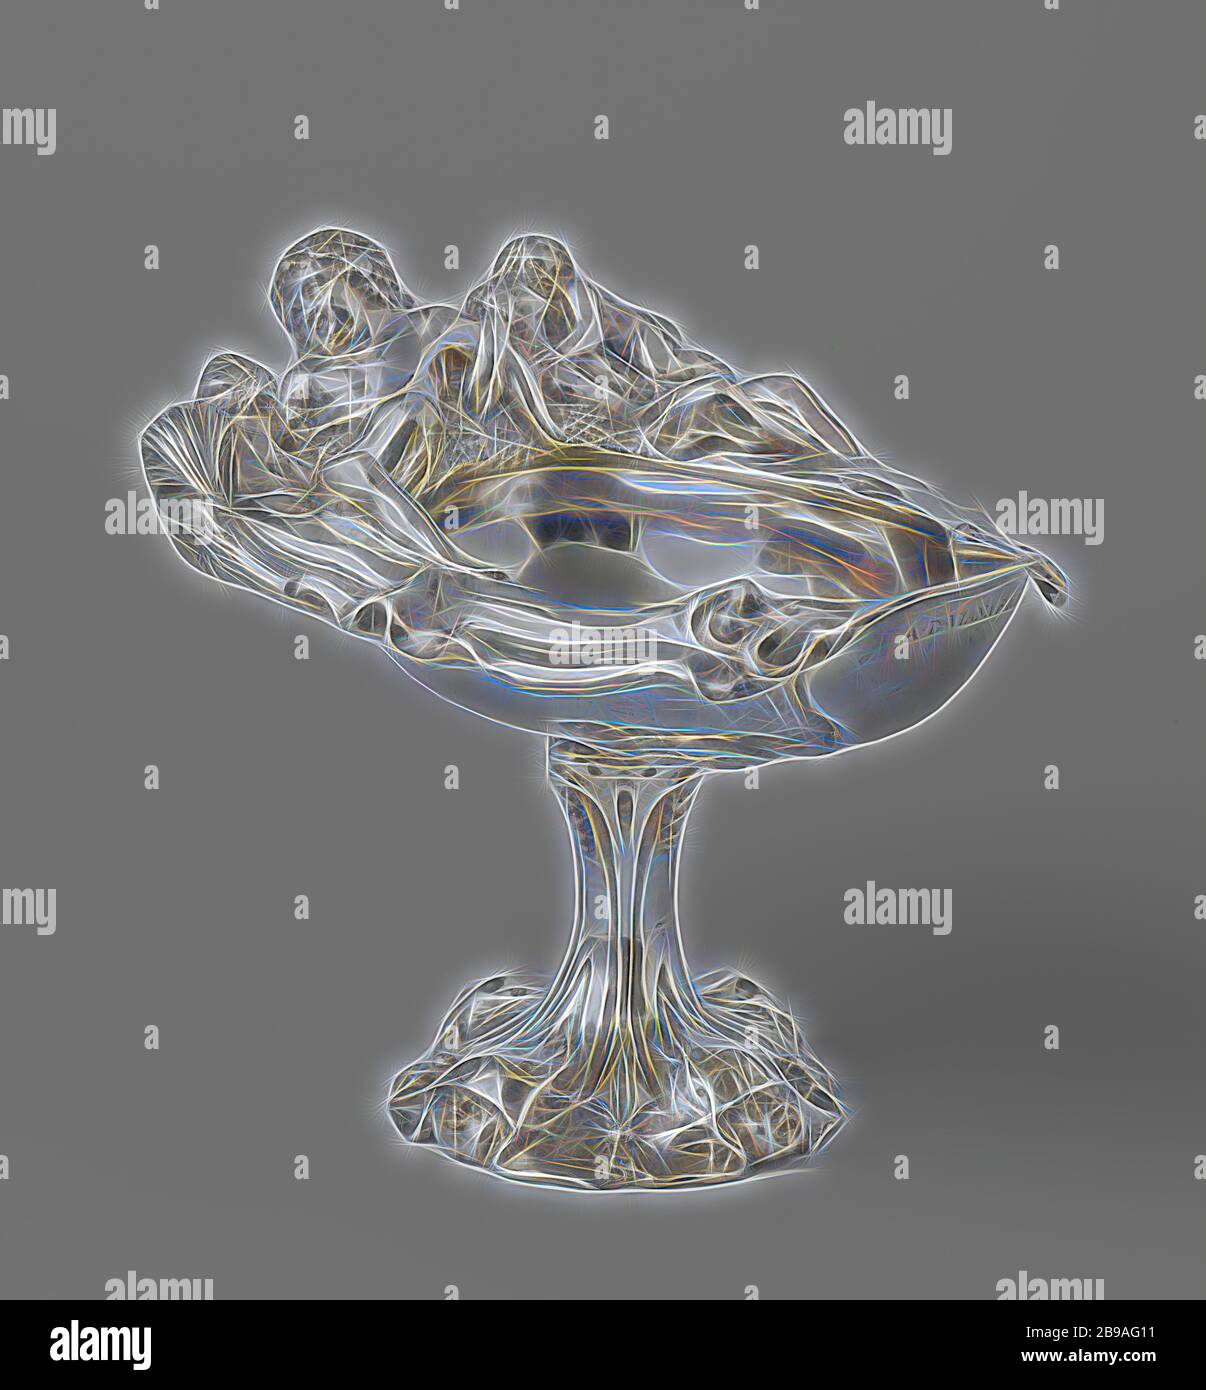 Tazza (footed drinking cup), Driven silver coupe, Driven silver coupe. The asymmetrical cuppa is decorated with lobster ornament. On the edge the figures of Bacchus, Ceres and Venus with Amor, auricular ornament, lobe style, ornament, (story of) Bacchus (Dionysus), Liber, (story of) Ceres (Demeter), (story of) Venus (Aphrodite), (story of) Cupid, Amor (Eros), Adam van Vianen (I), Utrecht, 1621, silver (metal), h 15.6 cm × l 17.8 cm × w 13.9 cm, Reimagined by Gibon, design of warm cheerful glowing of brightness and light rays radiance. Classic art reinvented with a modern twist. Photography ins Stock Photo